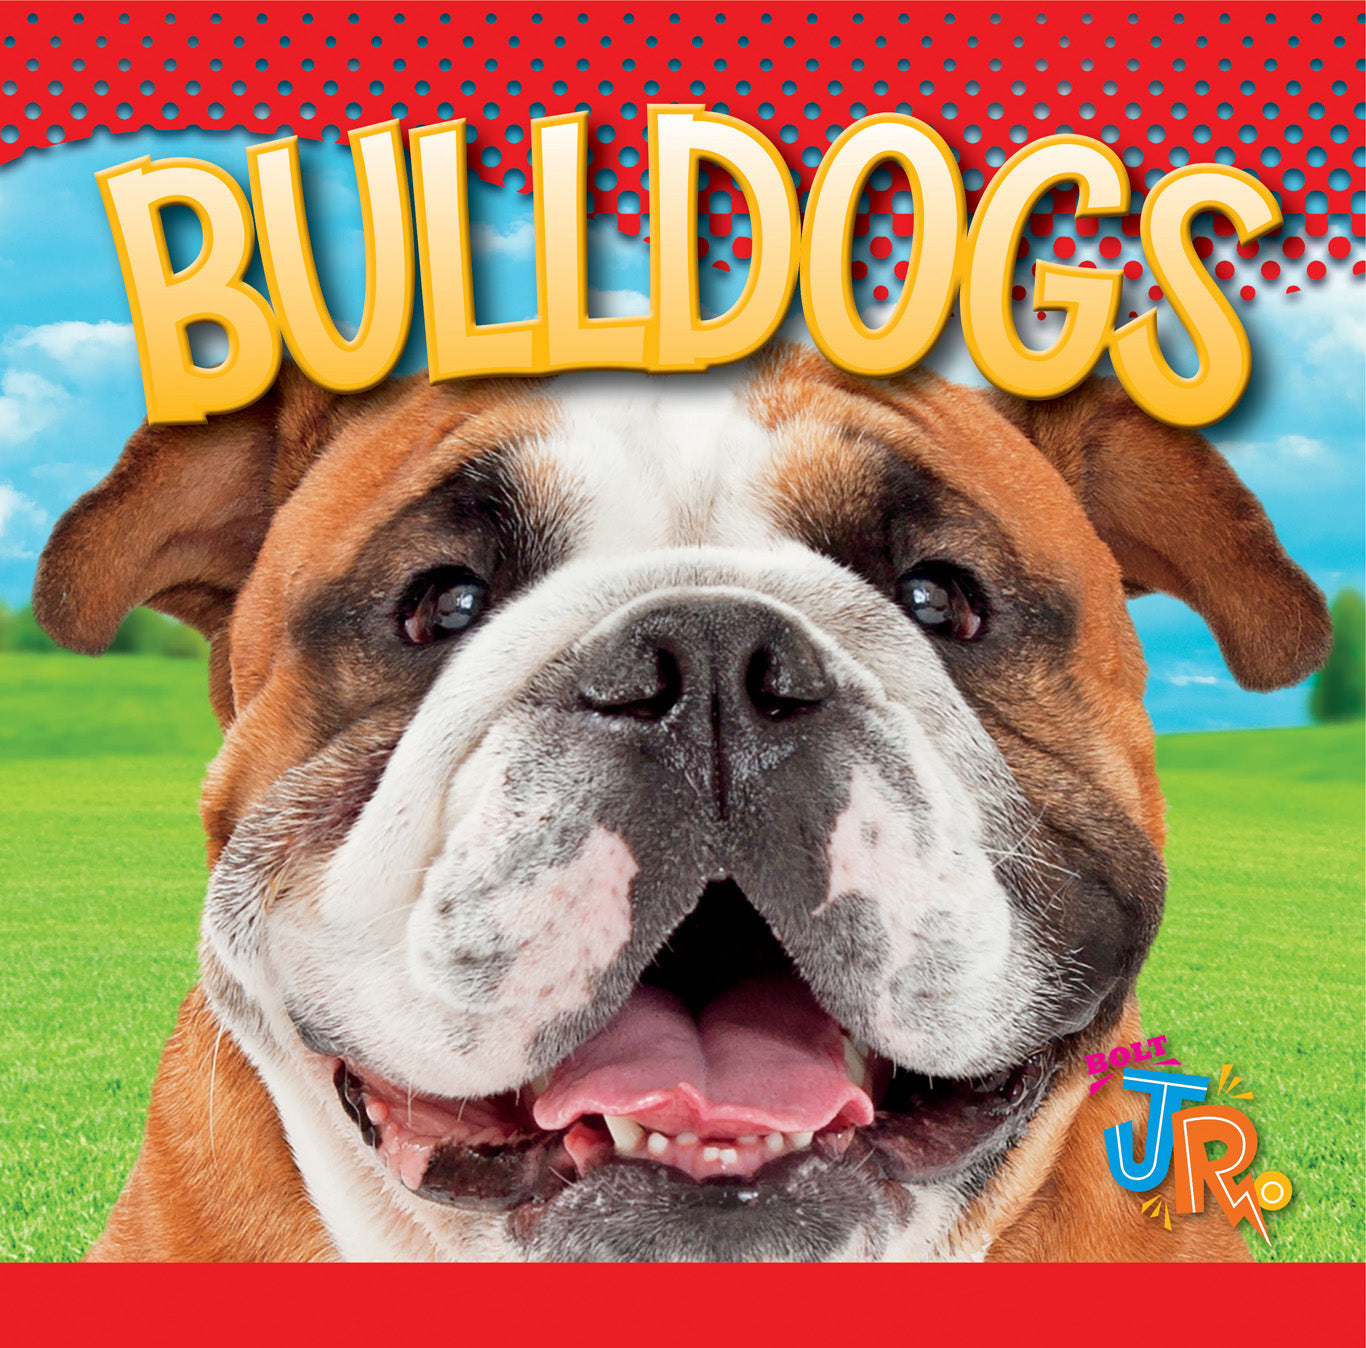 Our Favorite Dogs: Bulldogs